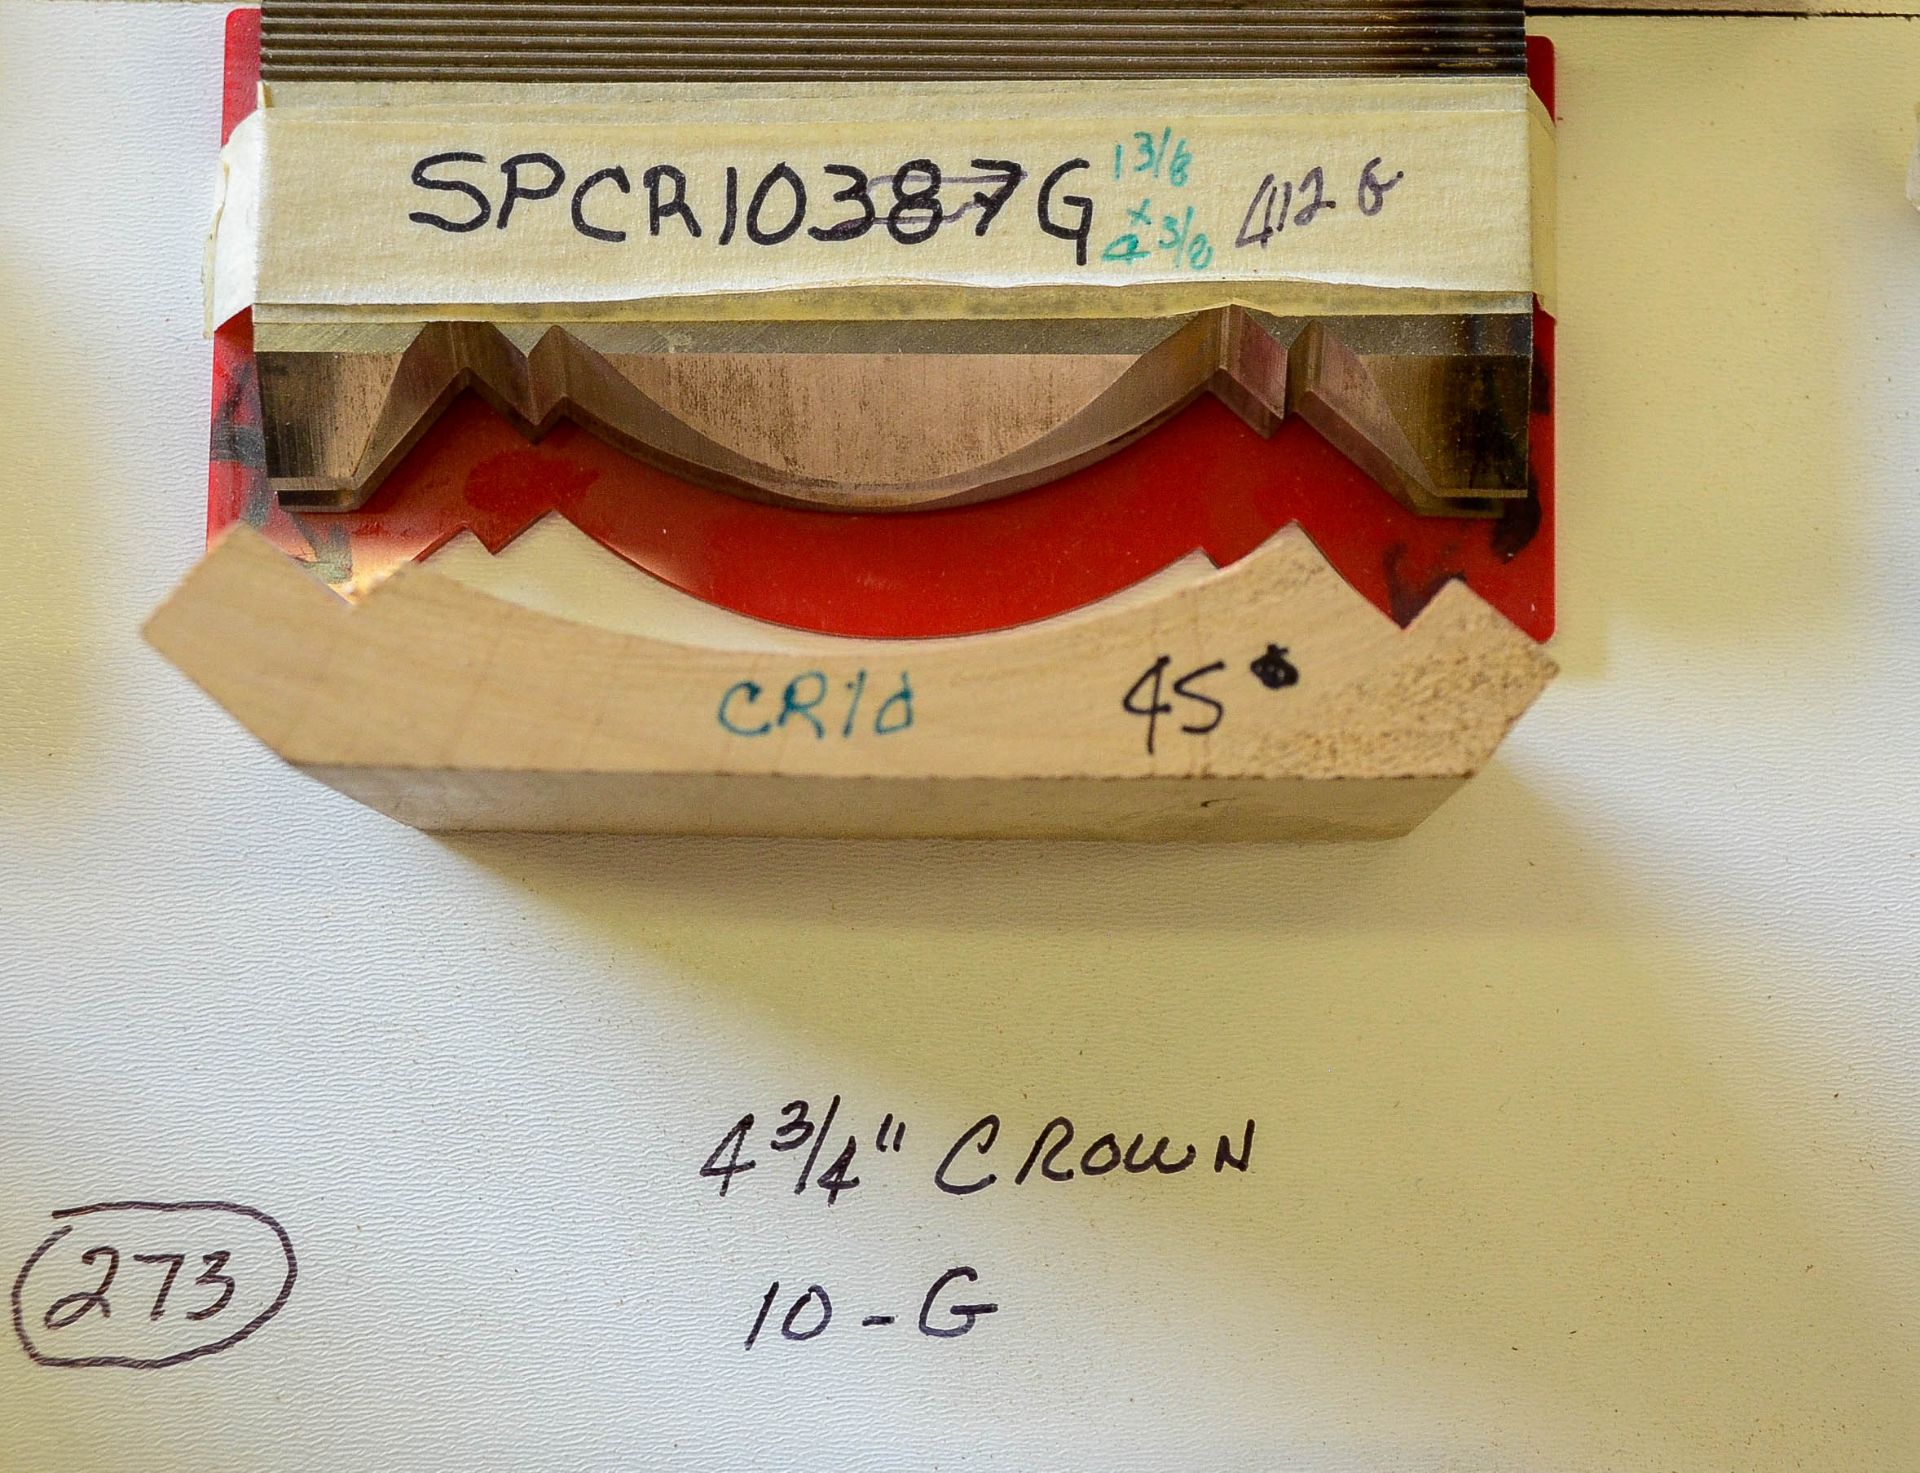 Moulding Knives, 4-3/4" Crown, 10 - G = 13/16", Knives are in Good Condition and Ready to Use (U.N